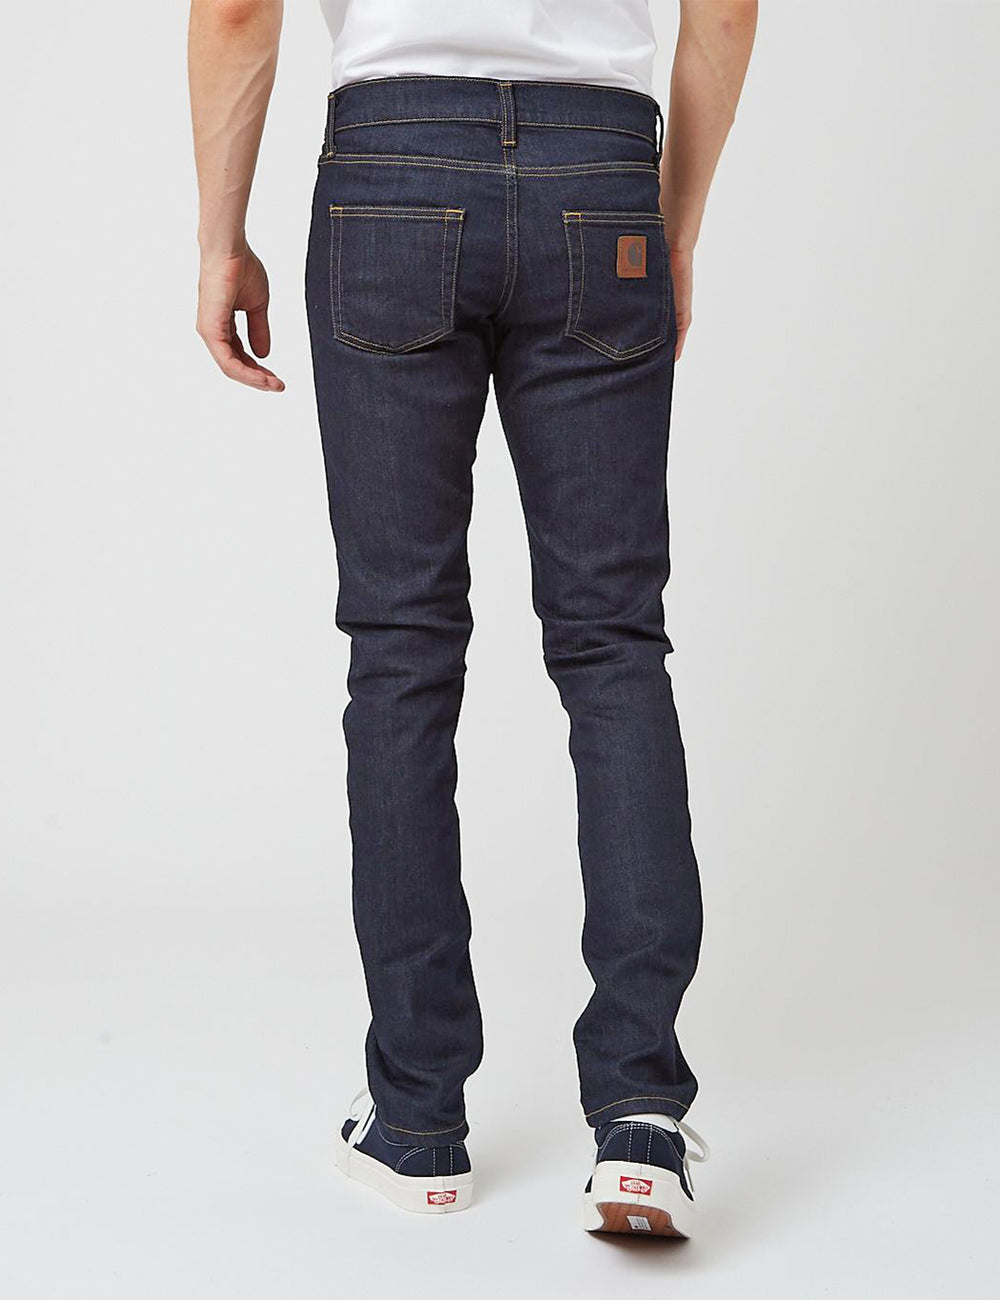 Pants And Jeans Carhartt WIP Rebel Pants Blue Stretch Denim, 54% OFF